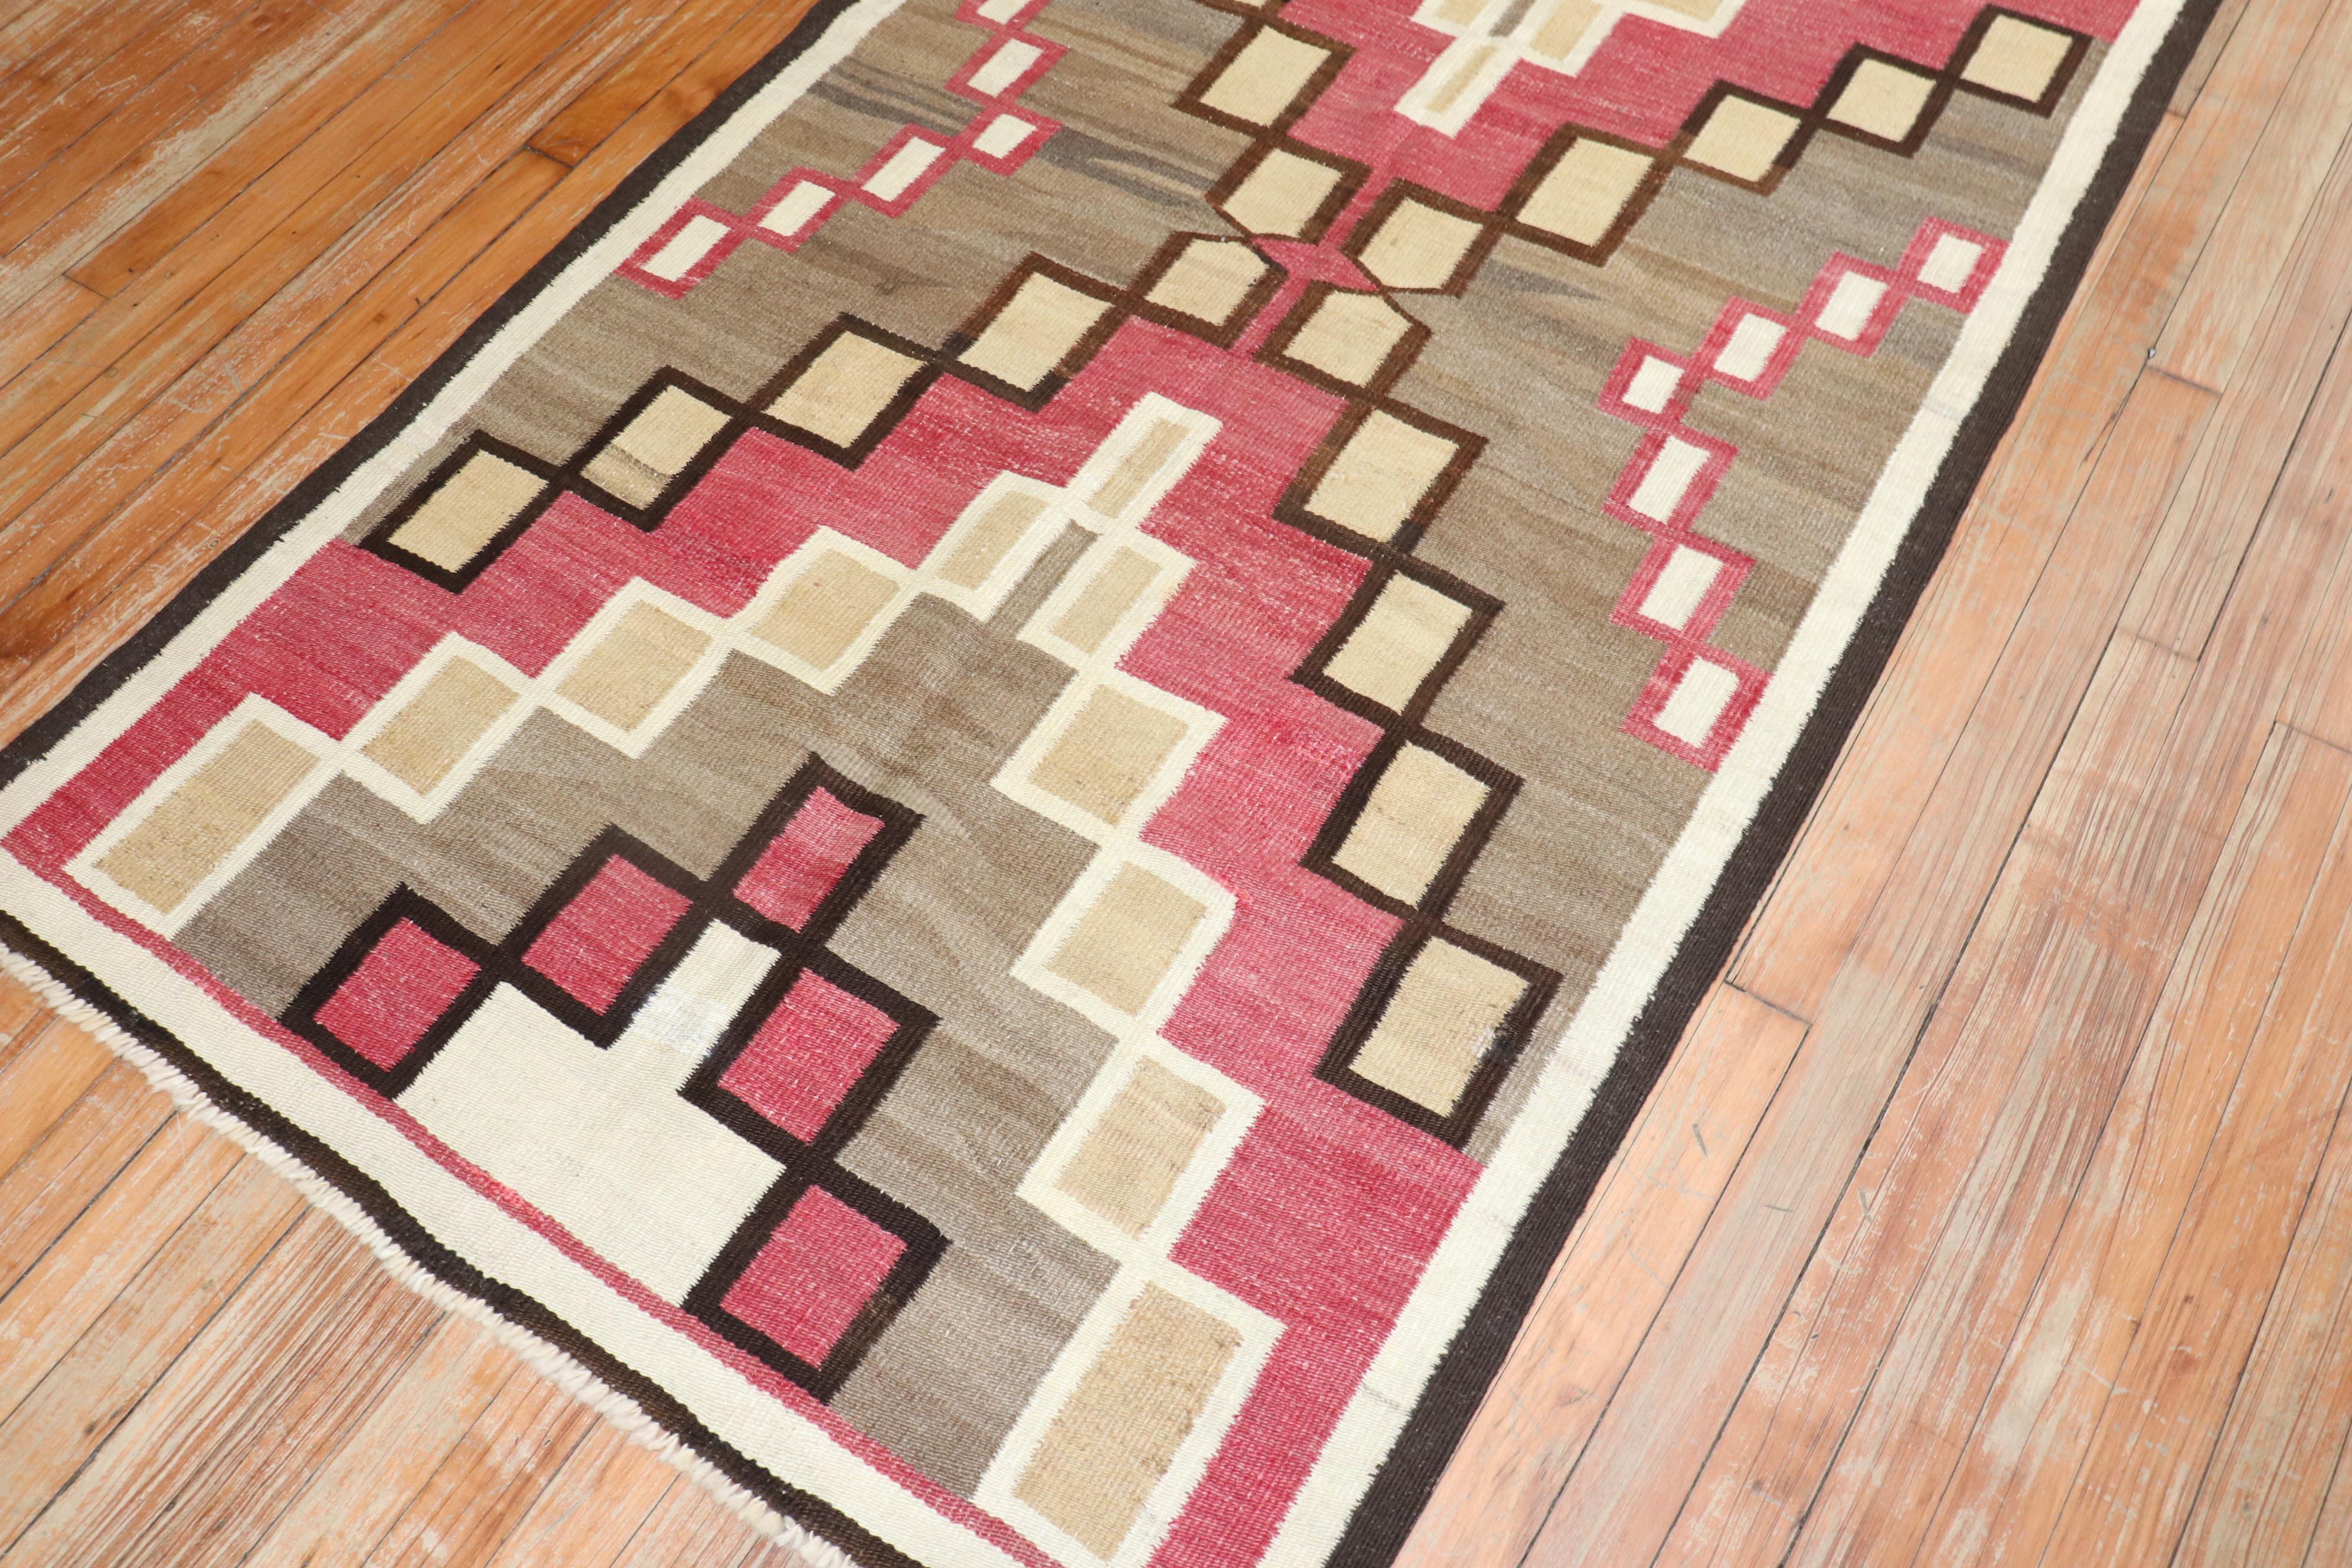 A highly decorative 20th-century American Navajo rug with a geometric tribal design with pink, cream ,camel and brown accents 

Measures: 3'5'' x 6'2''.